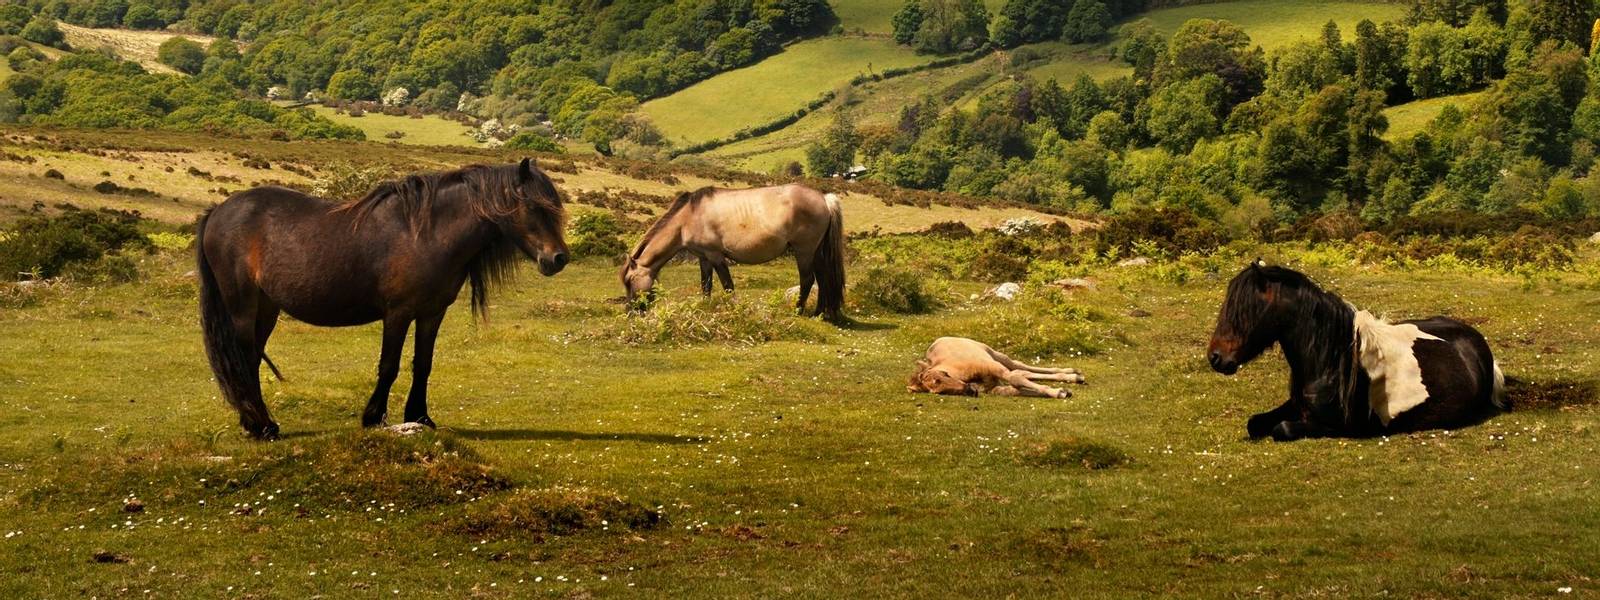 On Exmoor can be found the oldest breed of native pony in the British Isles.